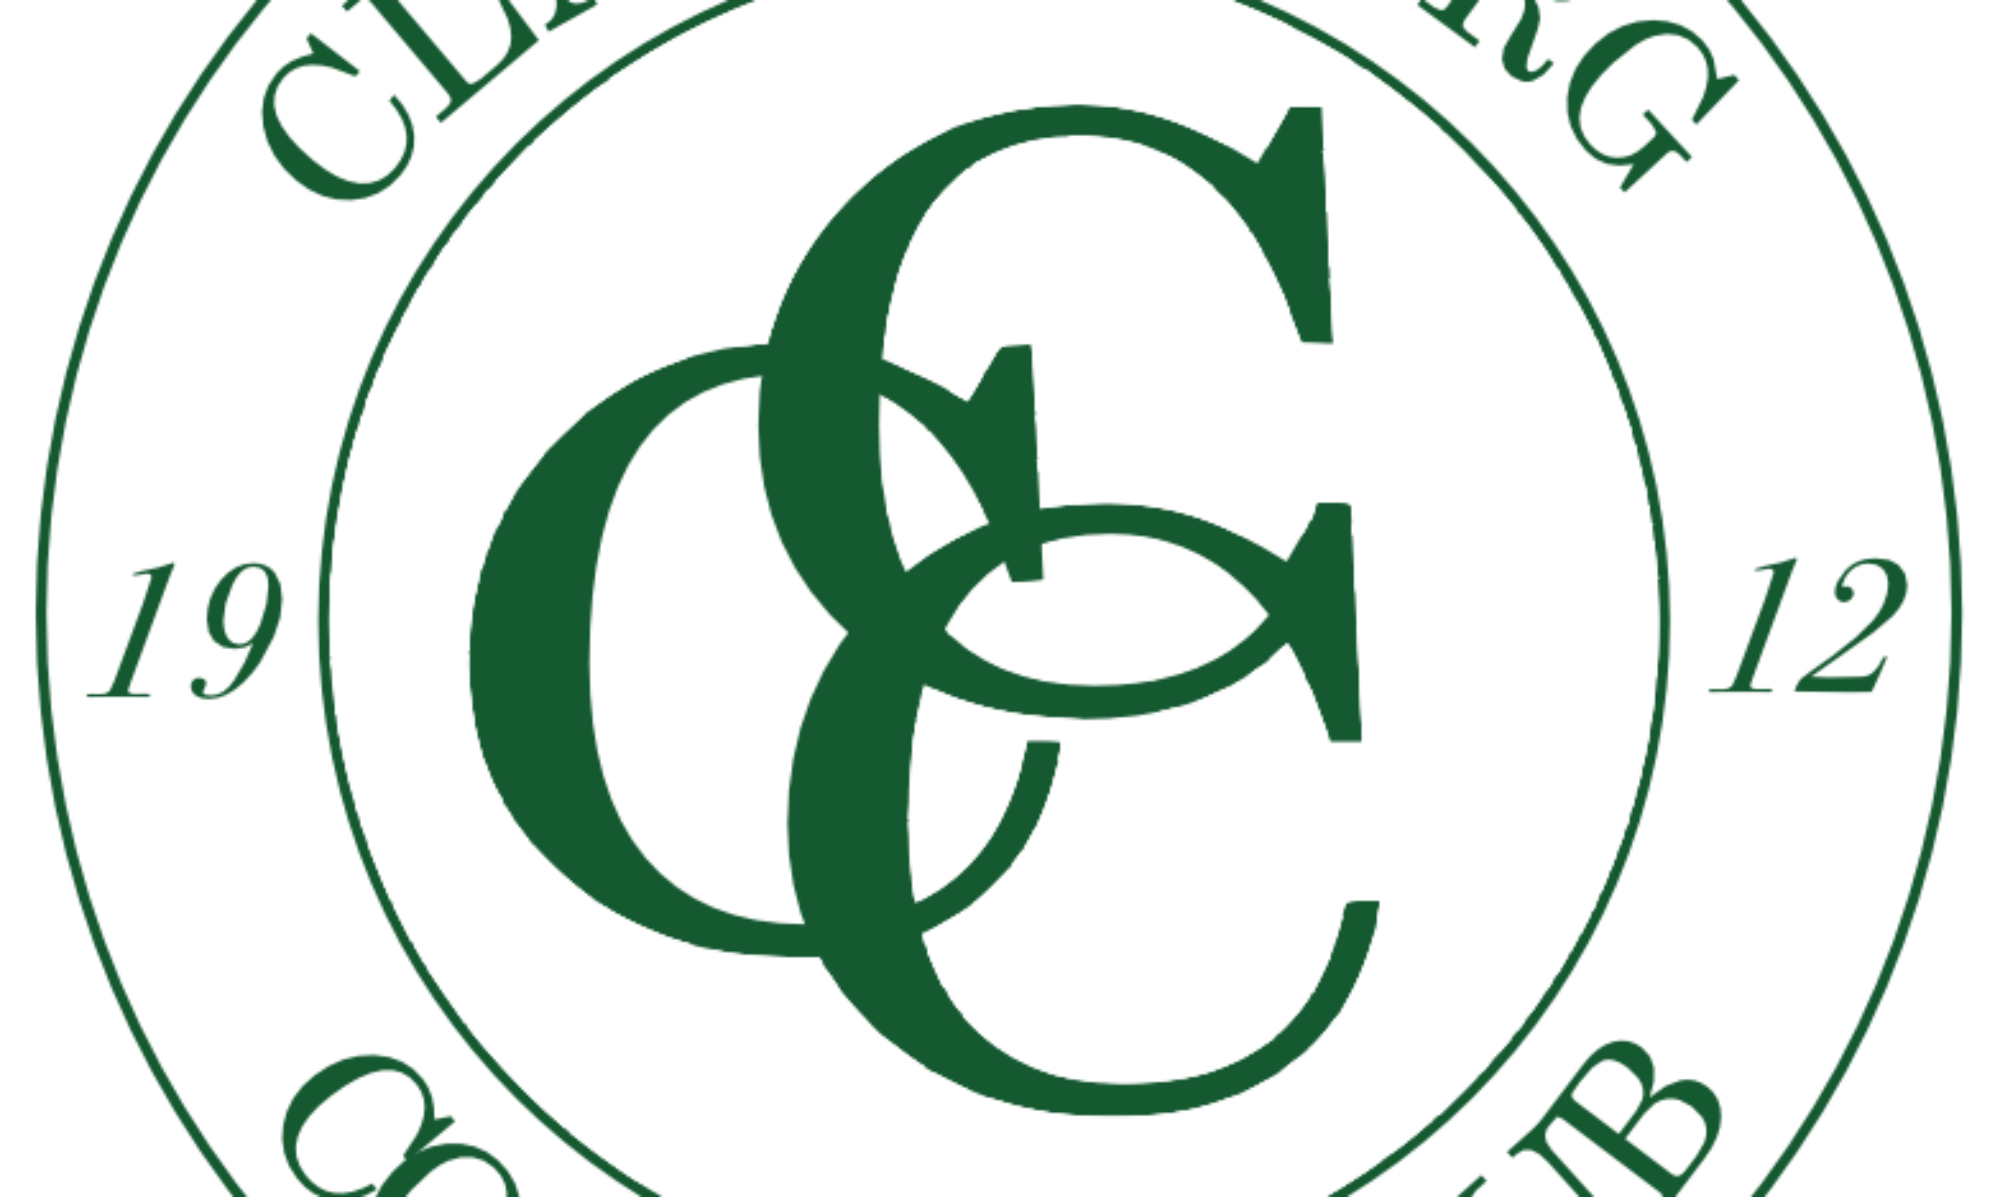 CCC Logo - Cropped CCC LOGO 1.png Country Club